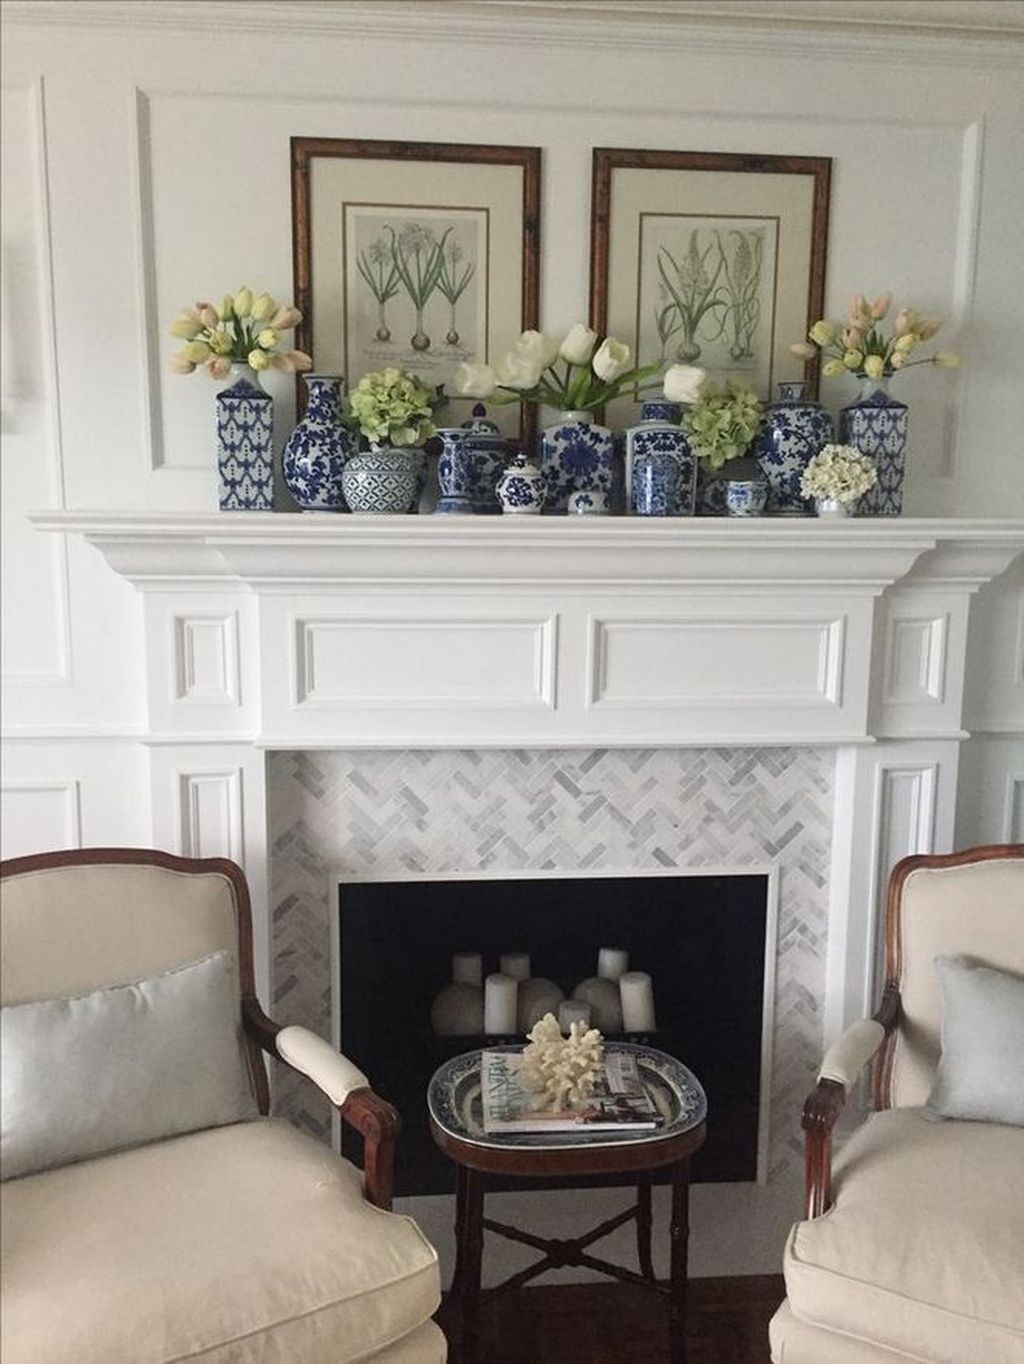 Simple Fireplace Mantel Ideas Fireplace Guide by Linda